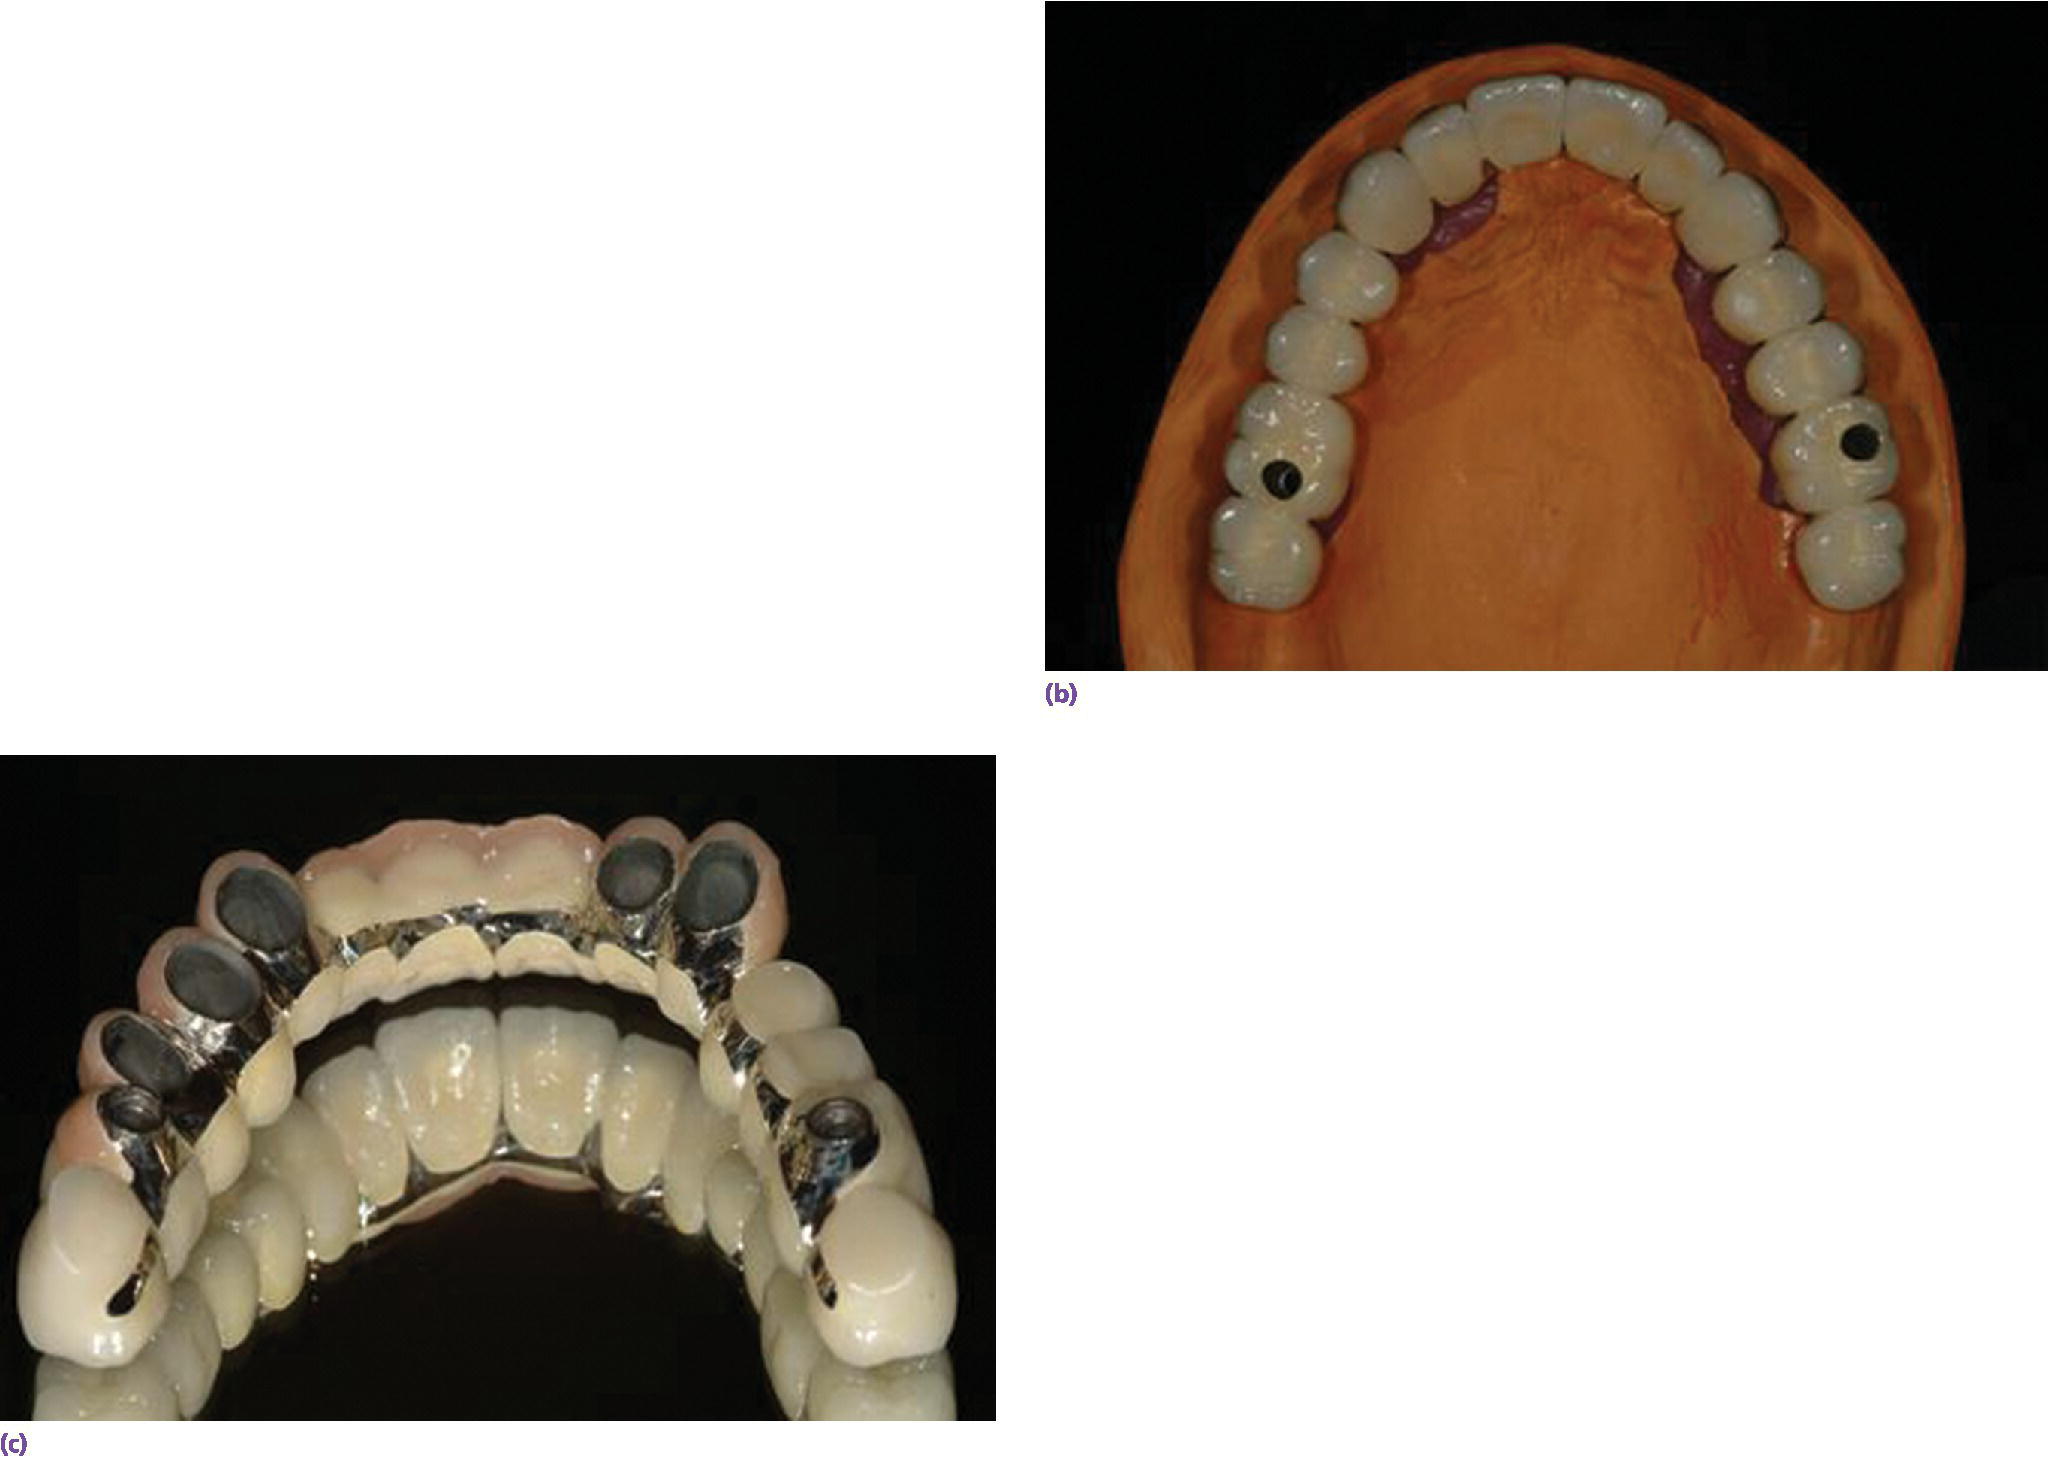 Photos of metal–ceramic design with cross arch splinting (top right) and intaglio of prosthesis with telescopic retainers and direct-to-fixture screw connections (bottom left).